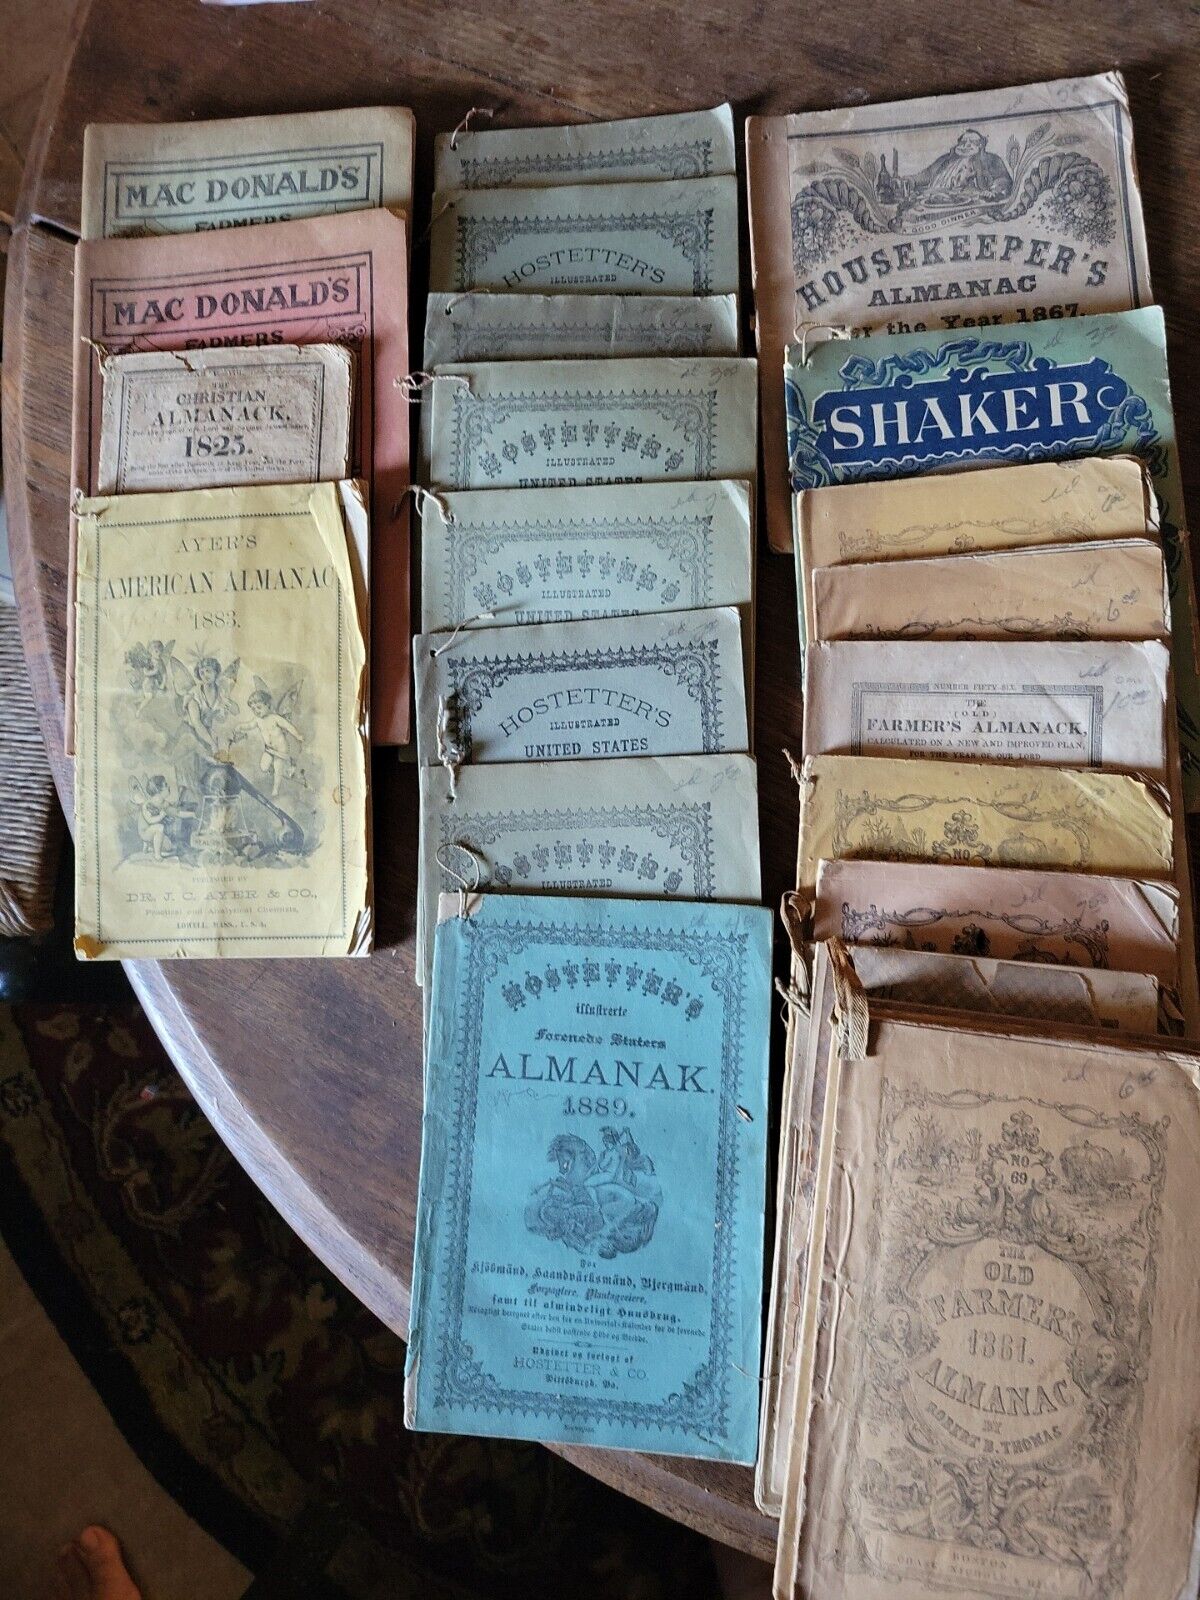 Lot of 25 Vintage Almanac Booklets - 1800s and 1900s, Old Farmer's, Shaker's, Ho